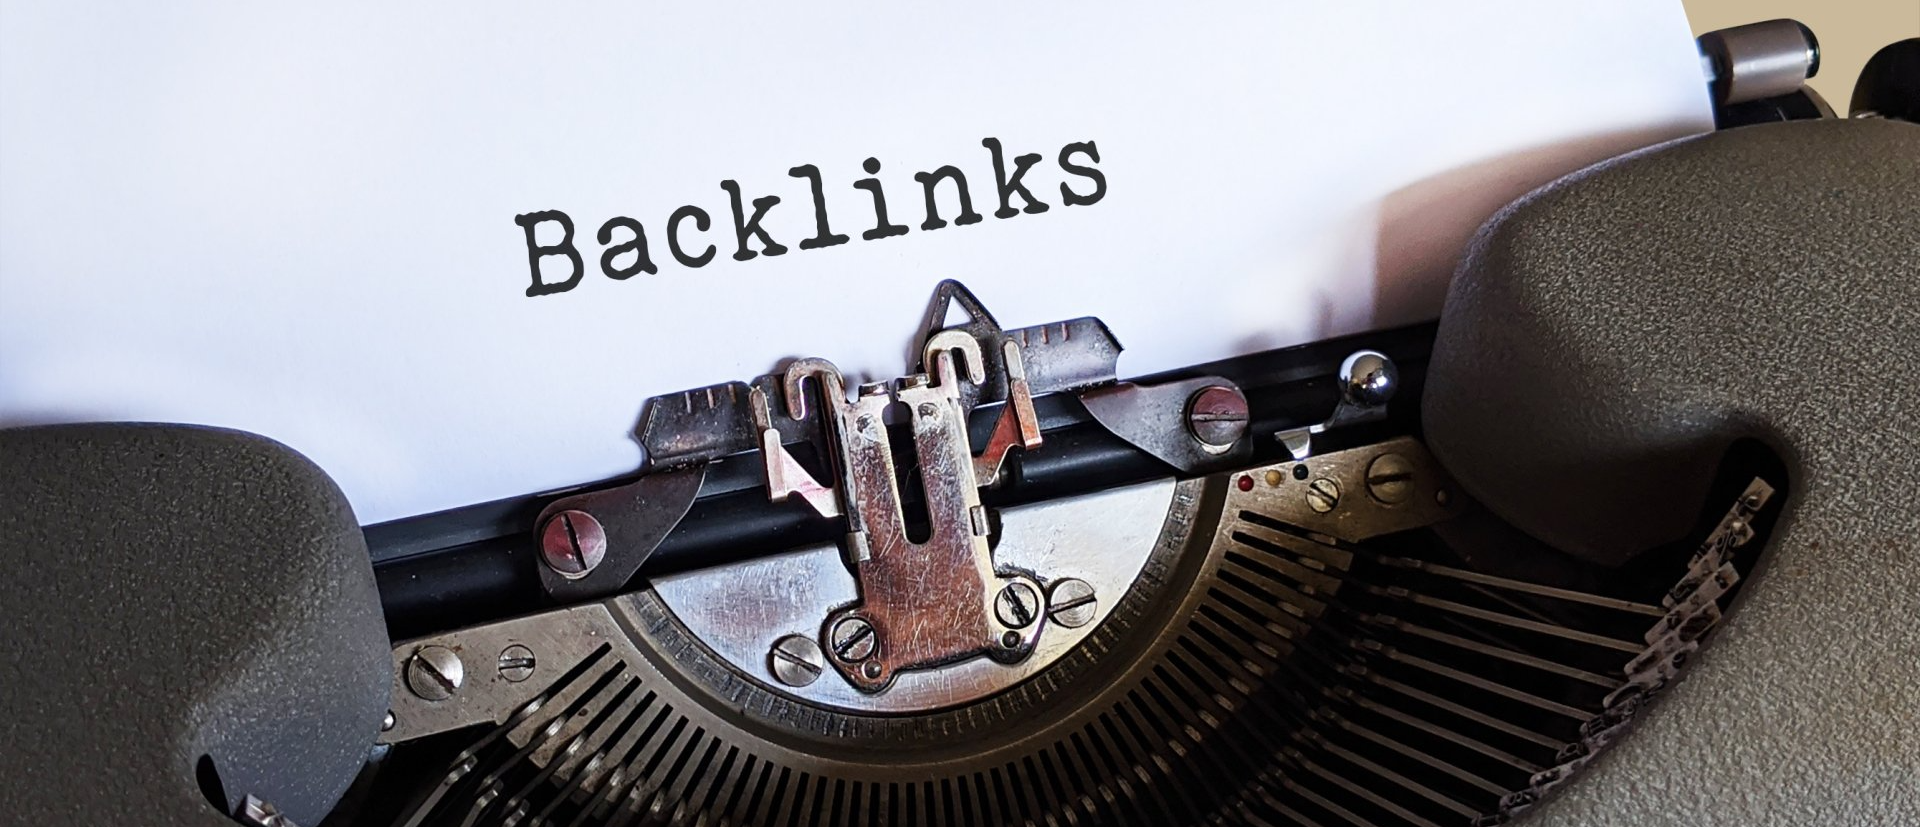 backlinking strategy for SEO